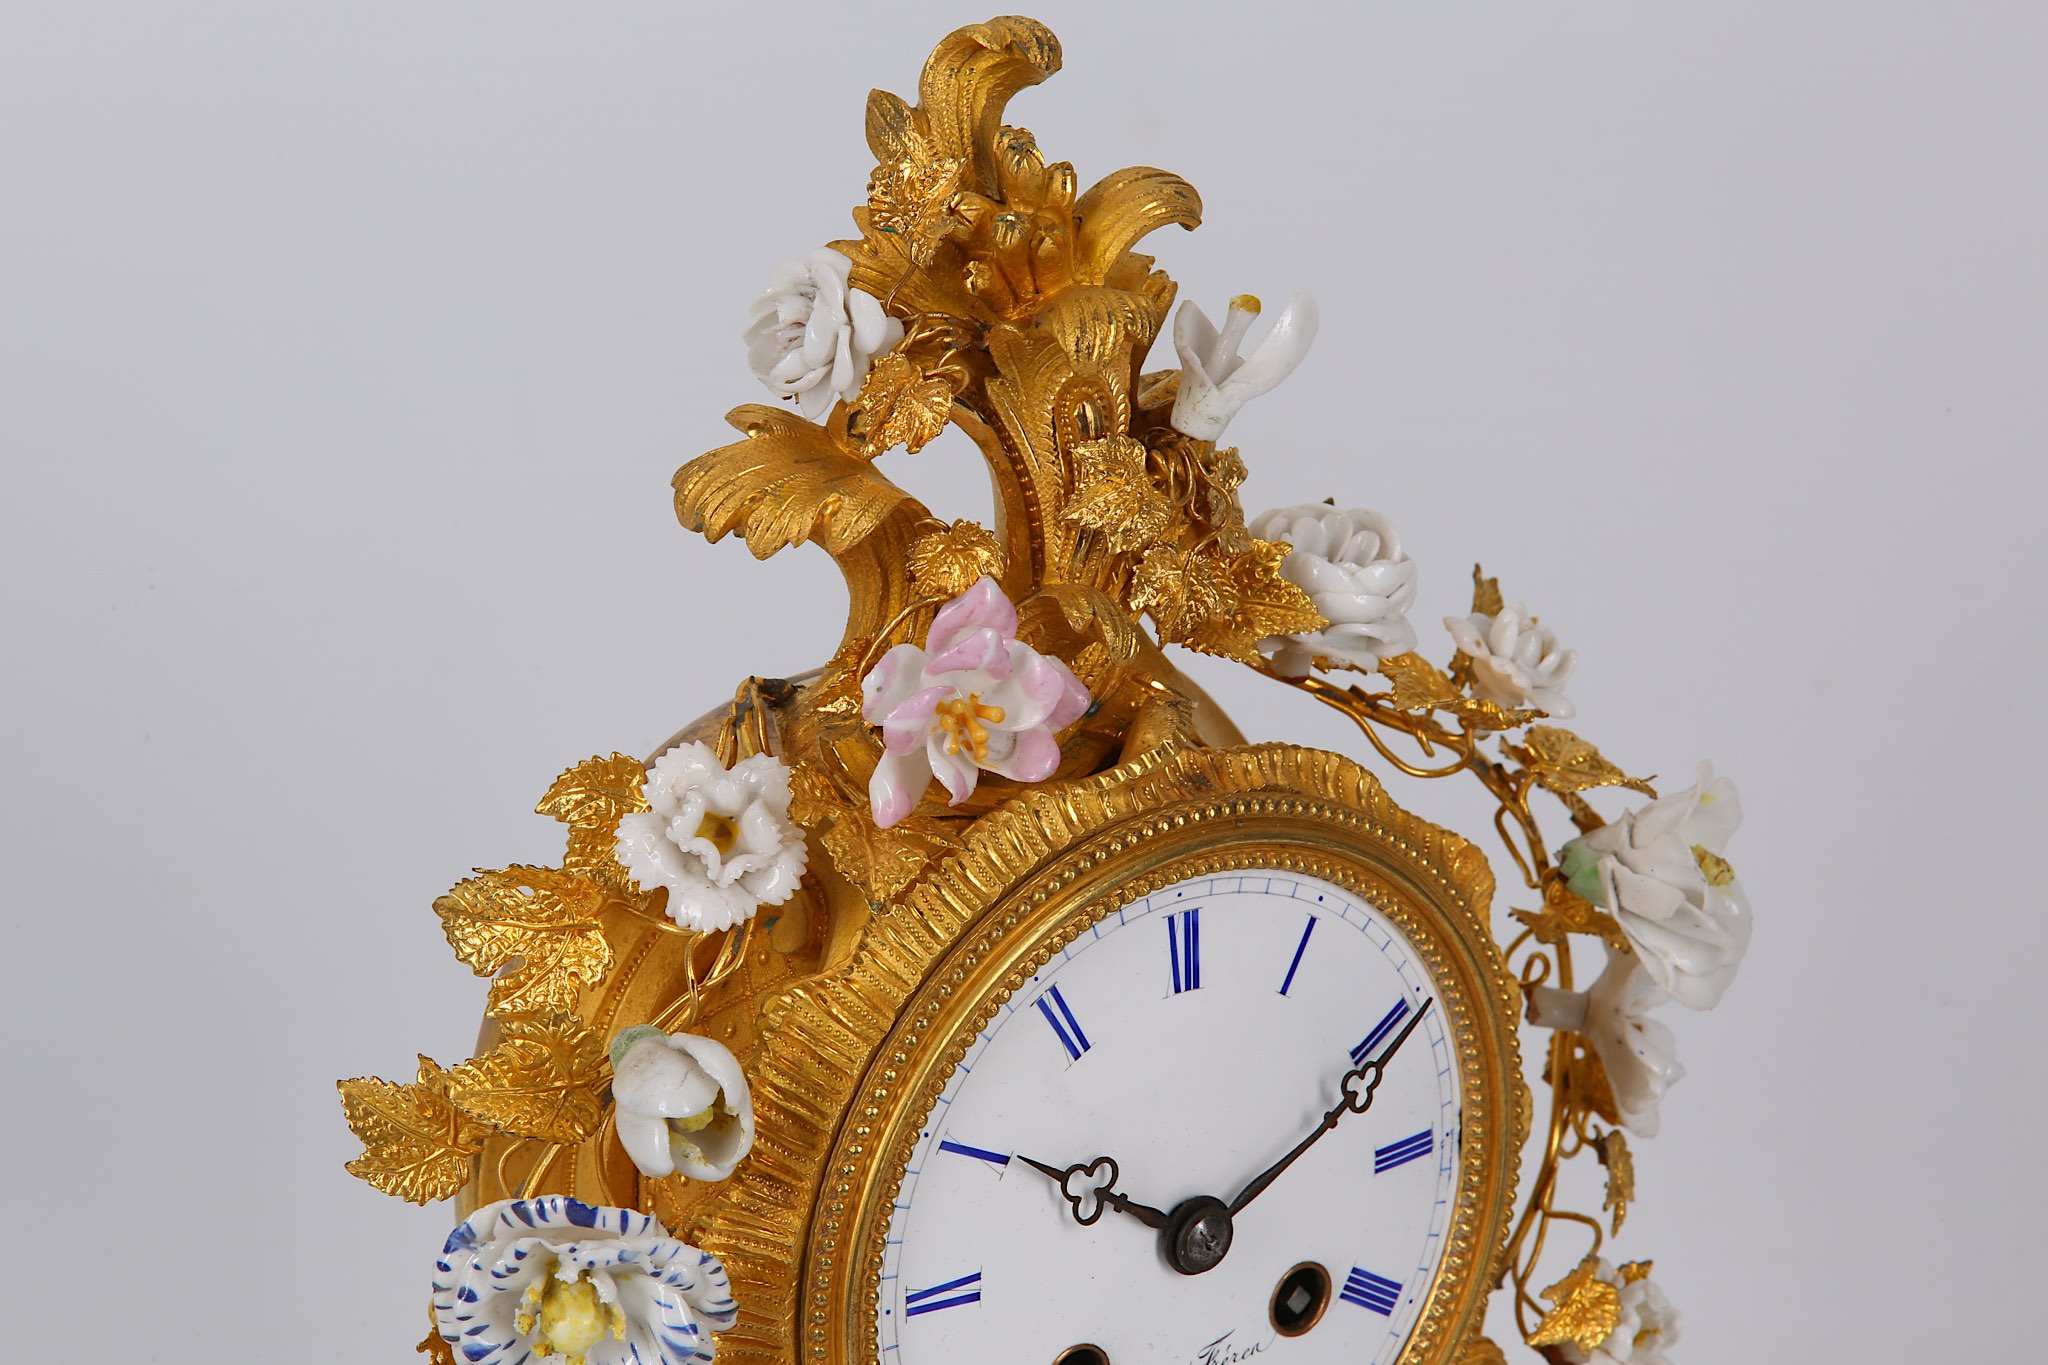 A MID 19TH CENTURY FRENCH GILT BRONZE AND PORCELAIN MOUNTED MANTEL CLOCK BY RAINGO FRERES, PARIS the - Image 4 of 9